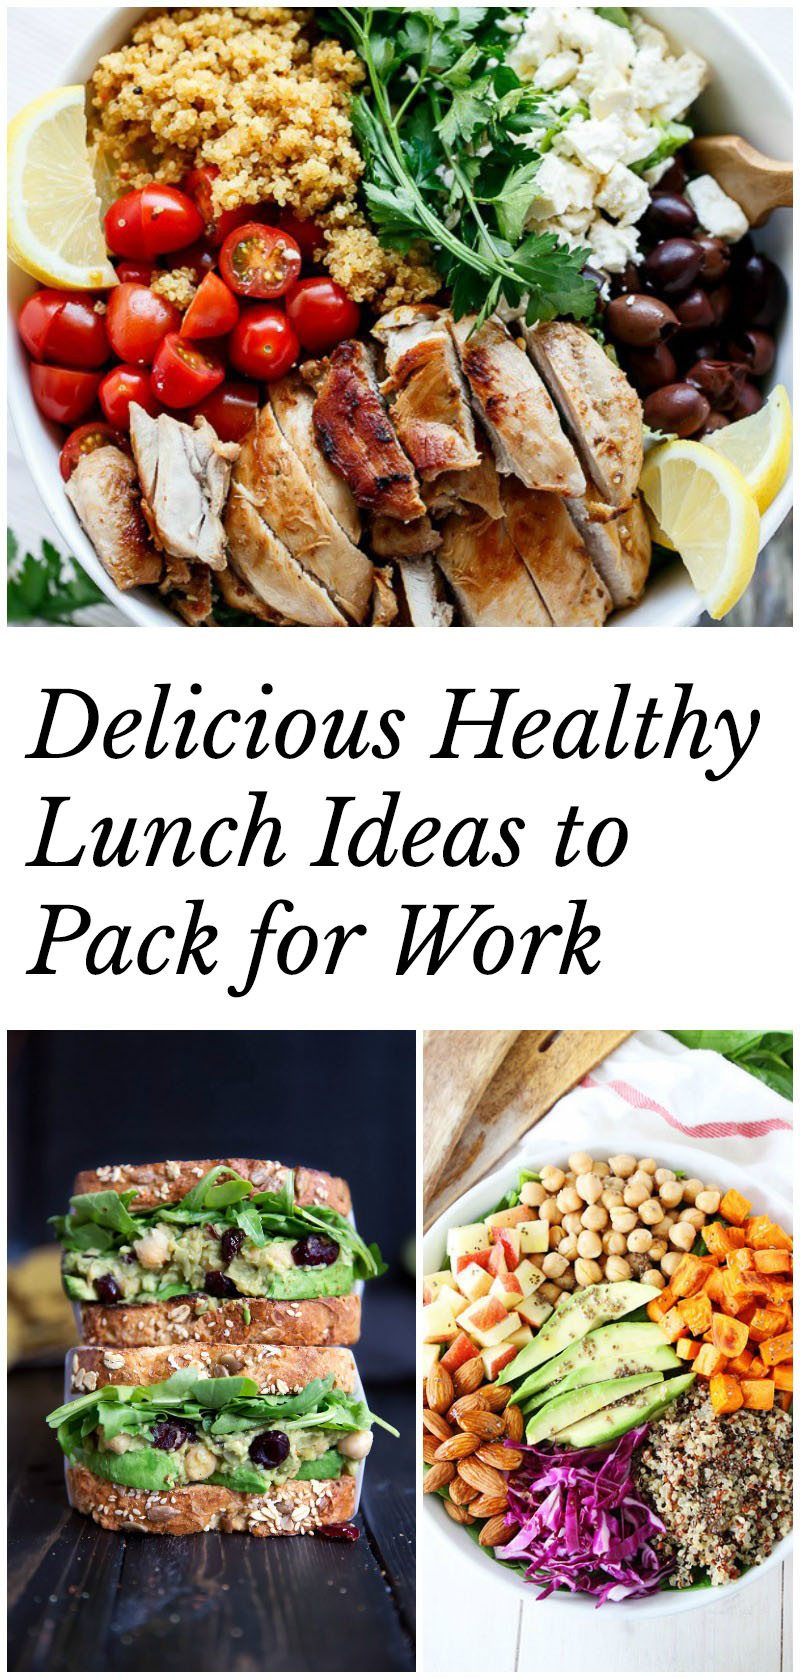 Healthy Work Lunches
 Healthy Lunch Ideas to Pack for Work 40 recipes